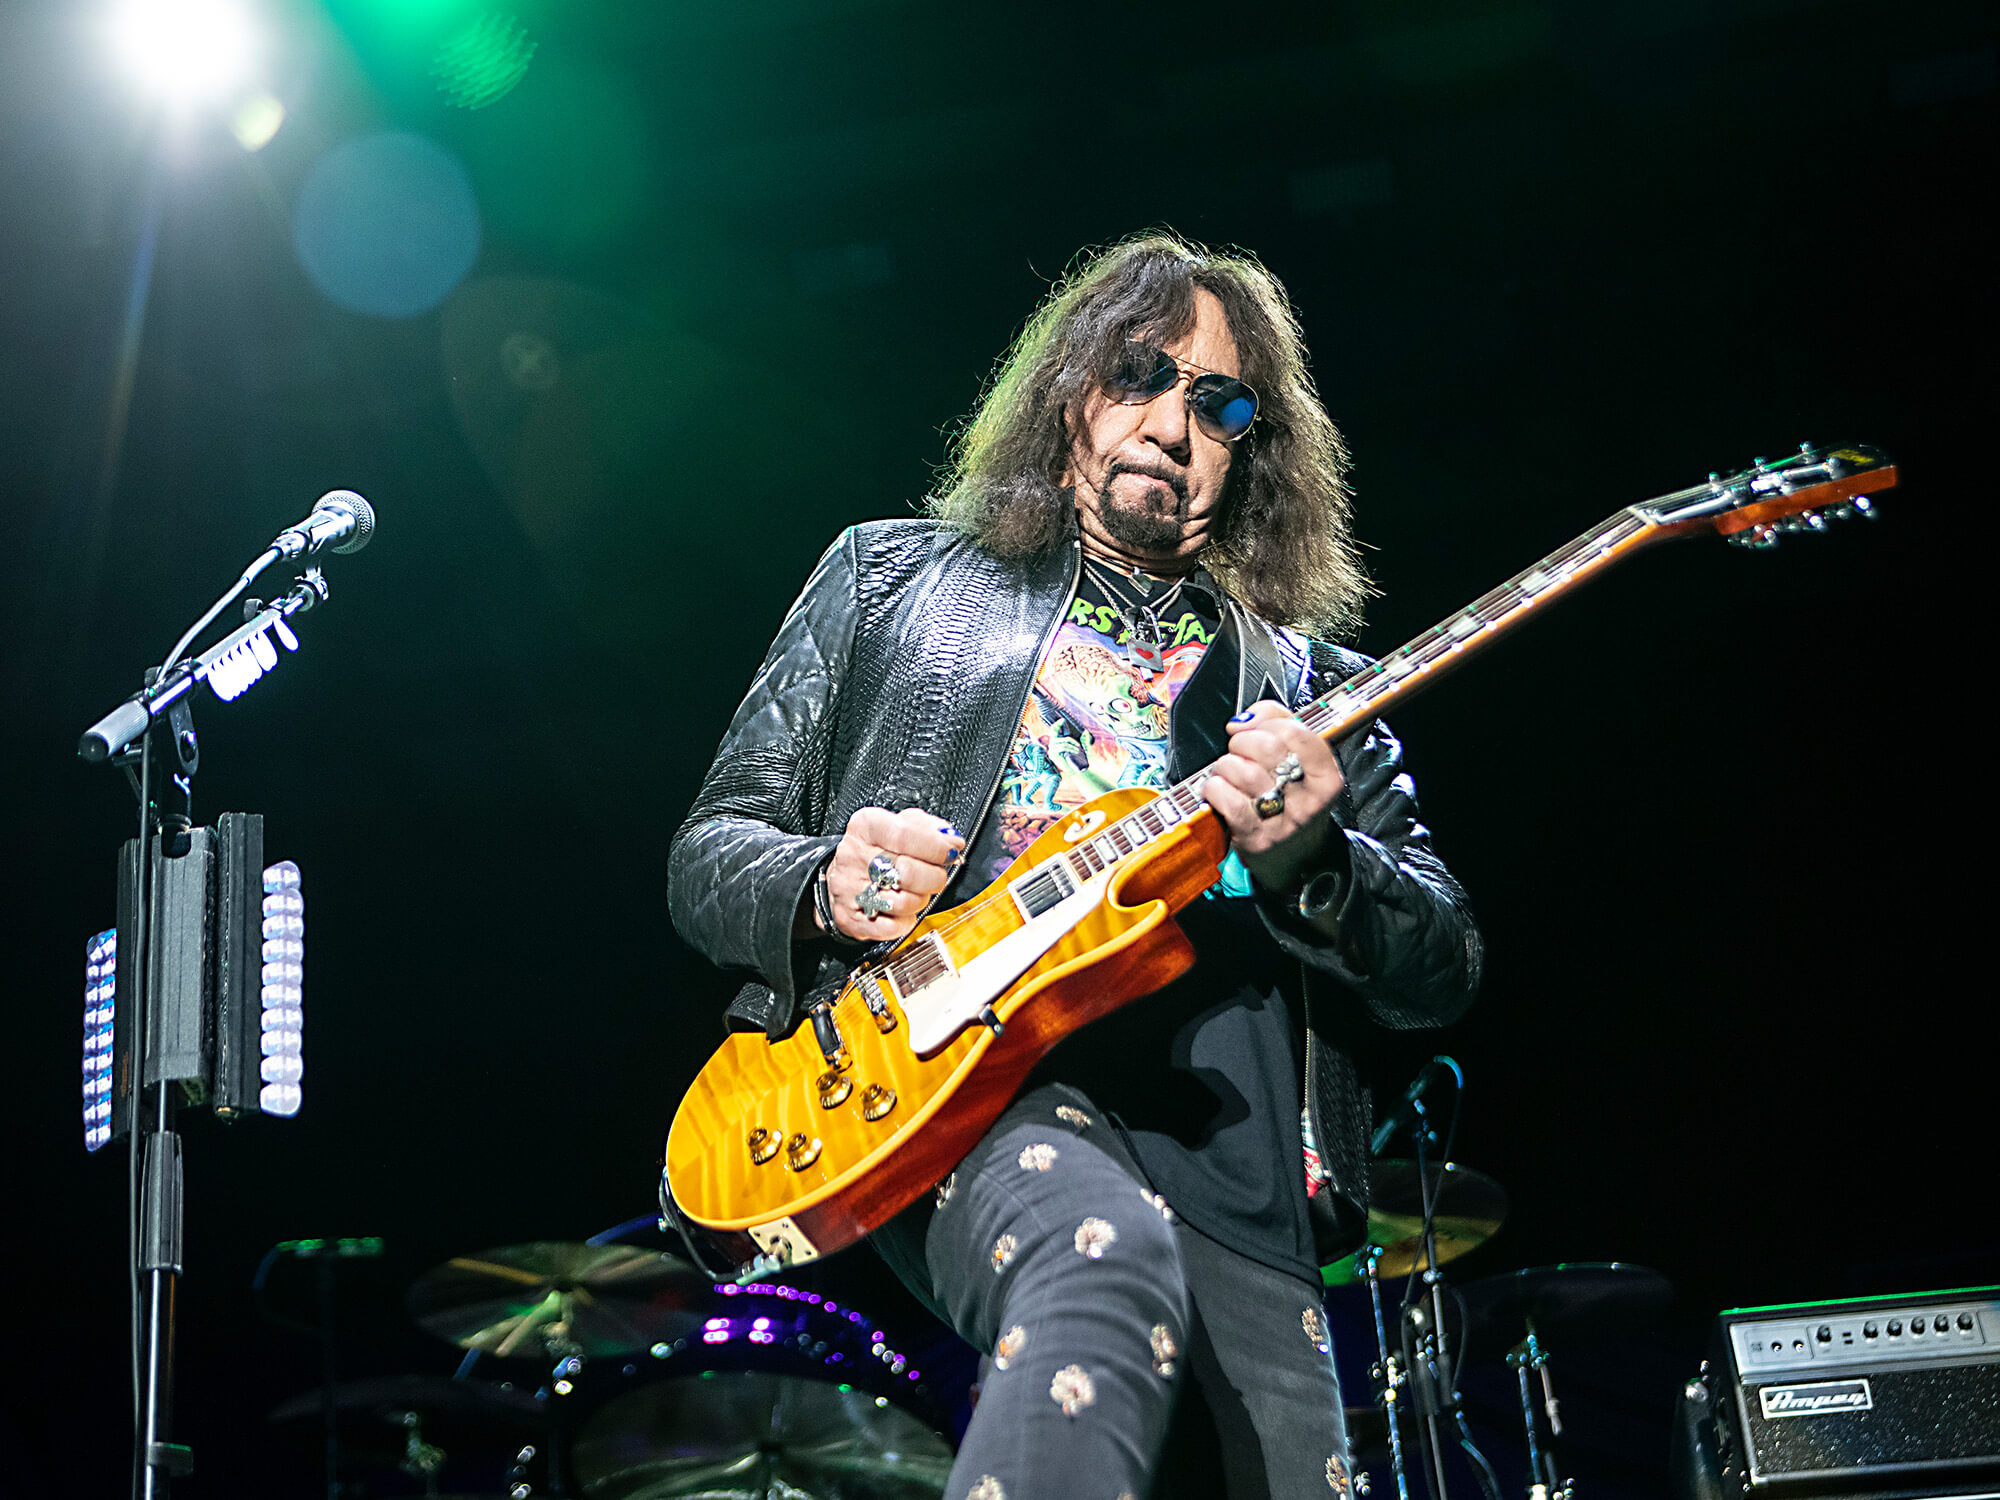 Ace Frehley on stage. The camera is pointing up at him and he is playing guitar. He's wearing shades and dark clothing.